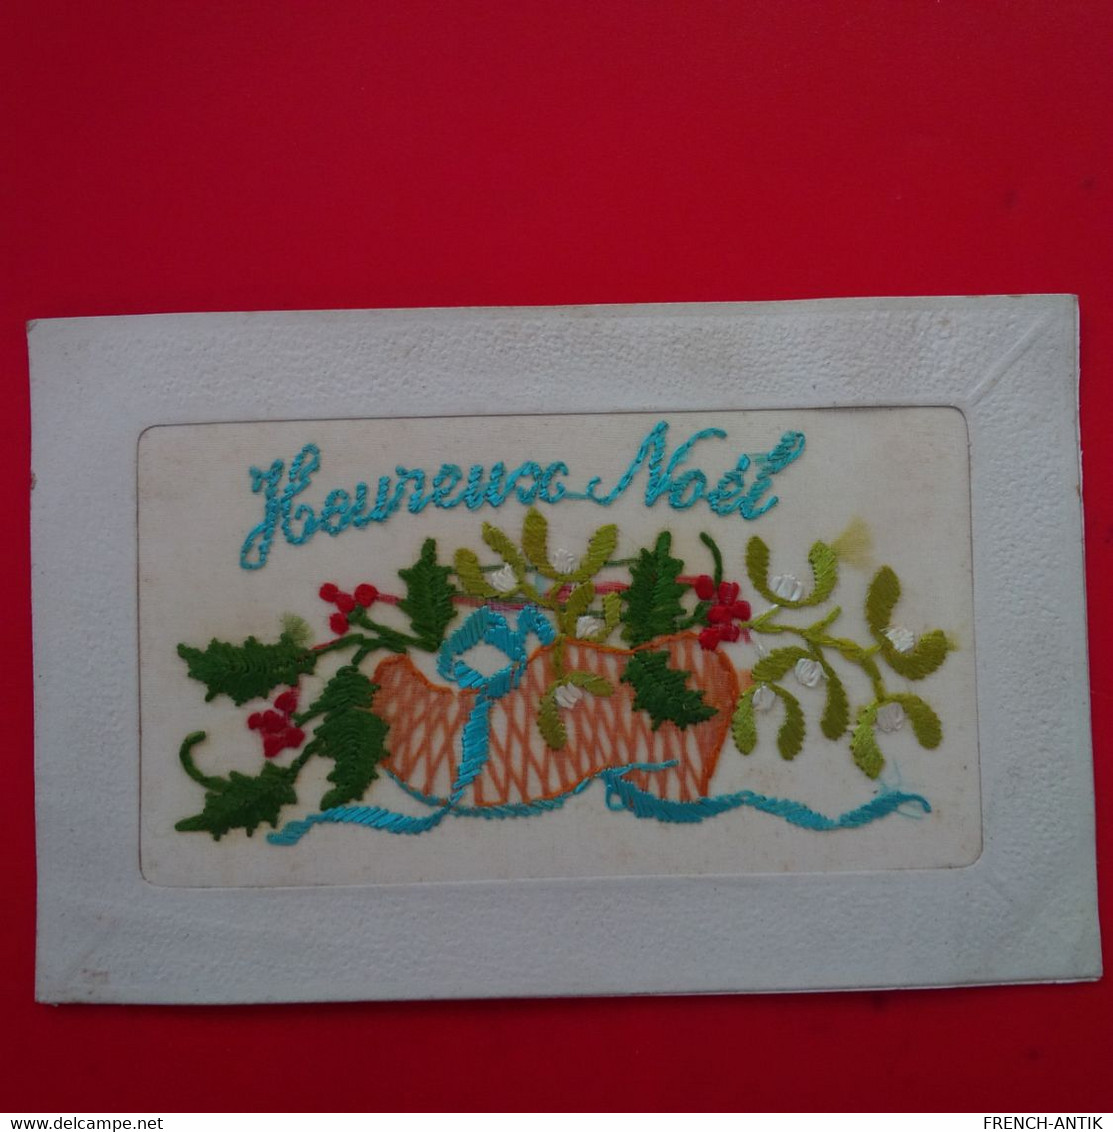 BRODEE HEUREUX NOEL - Embroidered